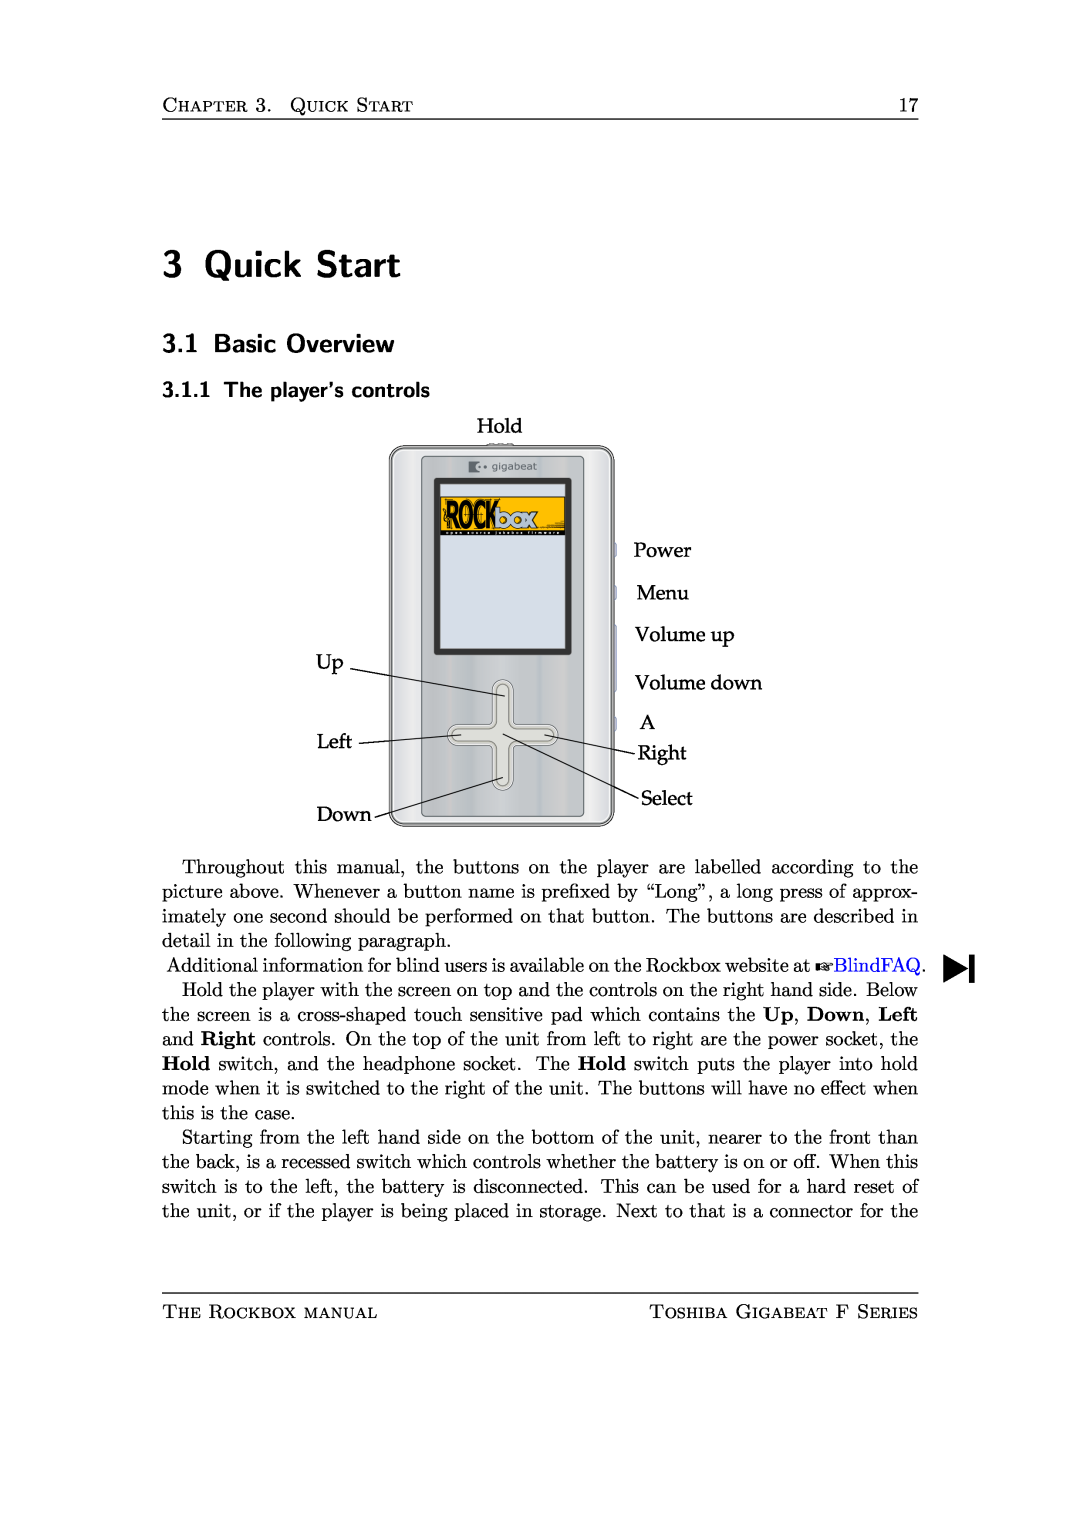 Toshiba F Series manual Quick Start, Basic Overview, The player’s controls 